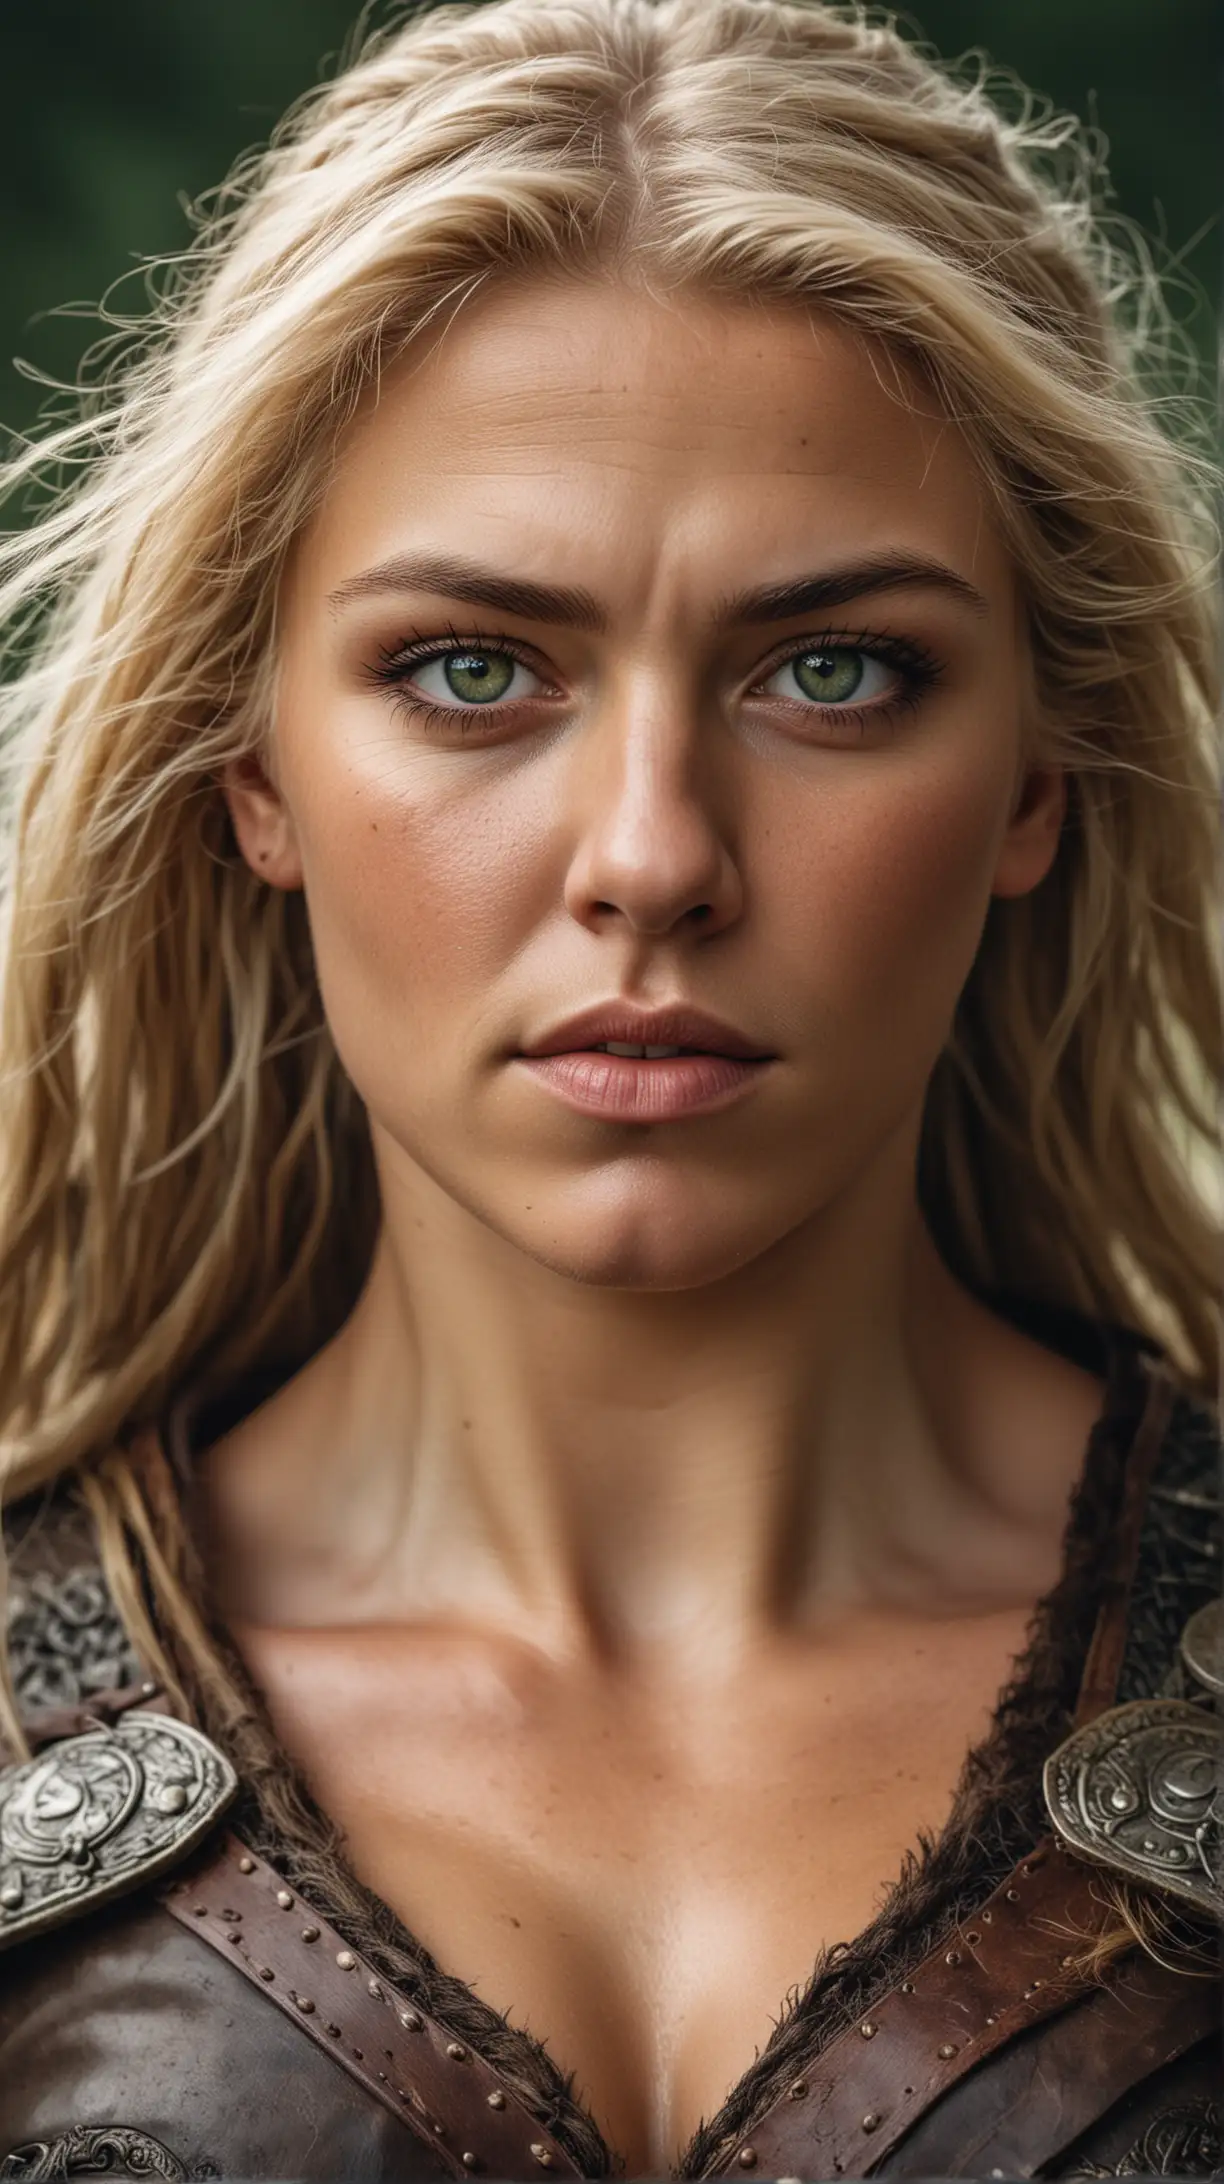 a strong powerful muscular viking woman with blonde hair and green eyes